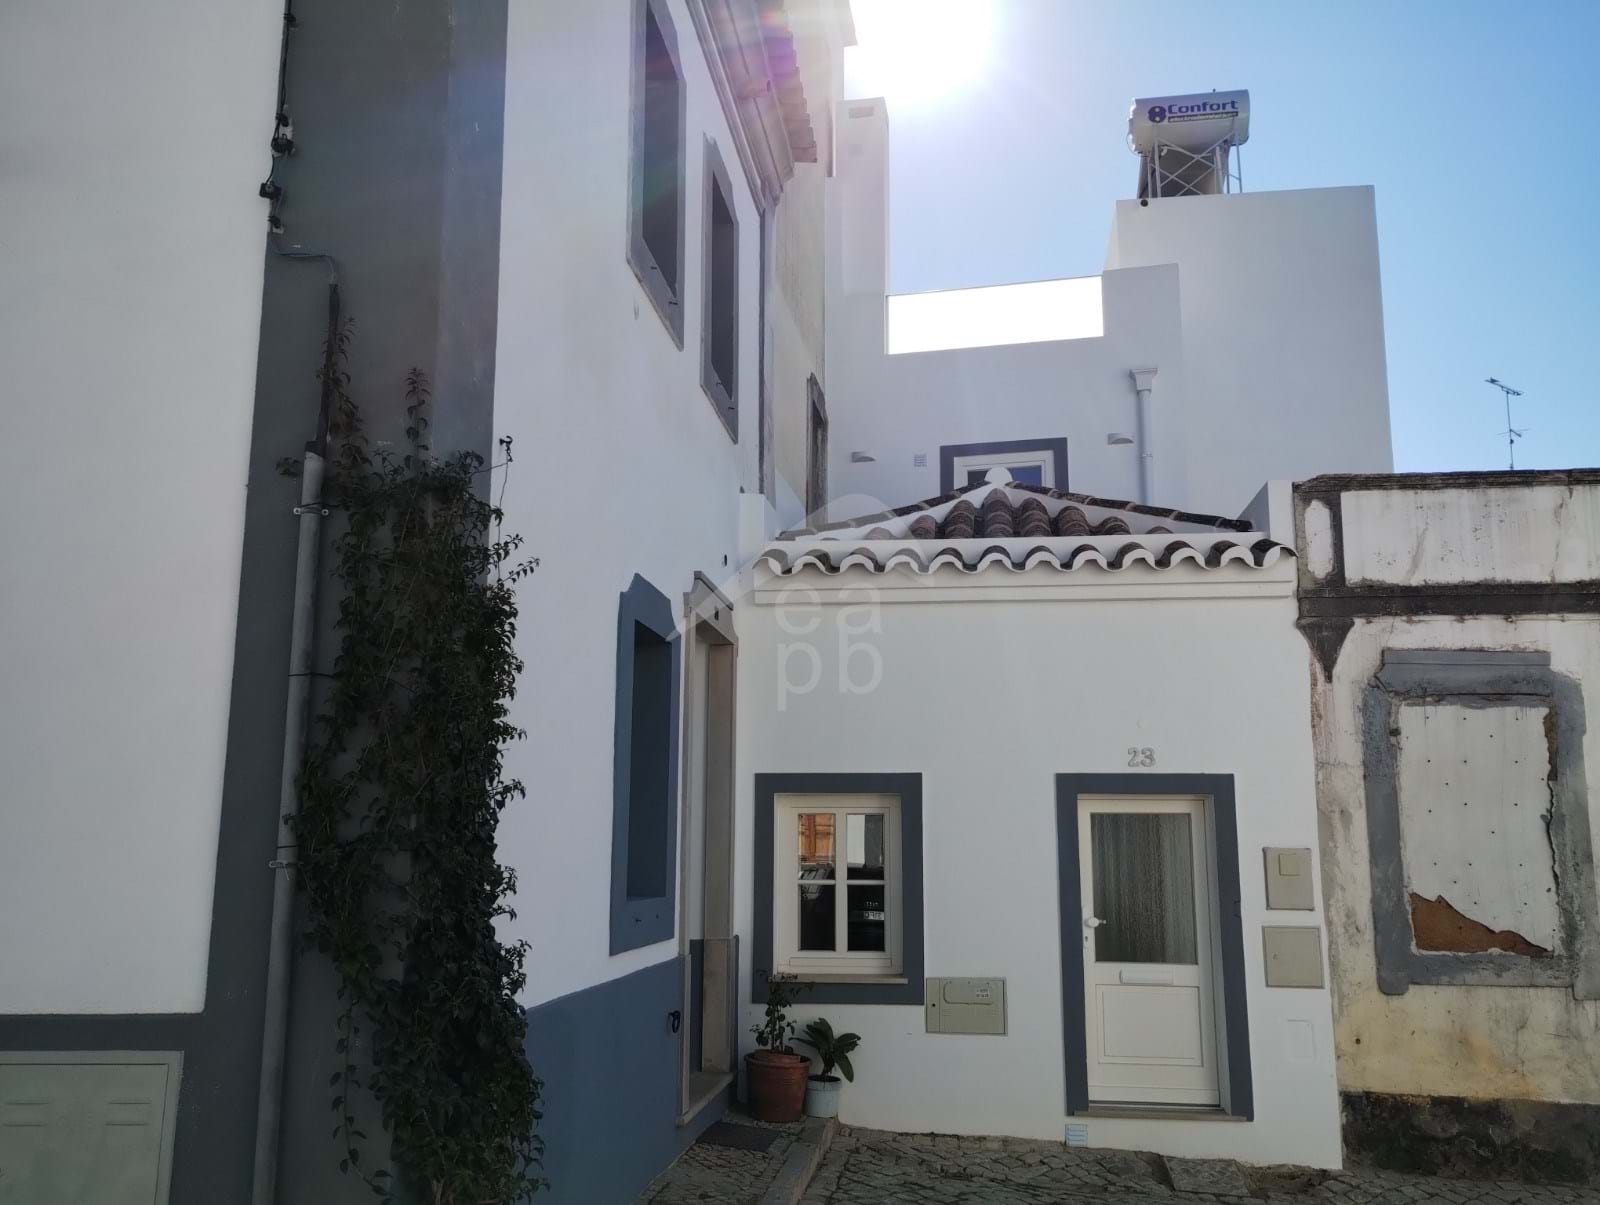 T1+ New Townhouse with terraces and roof top  swimming pool in Tavira